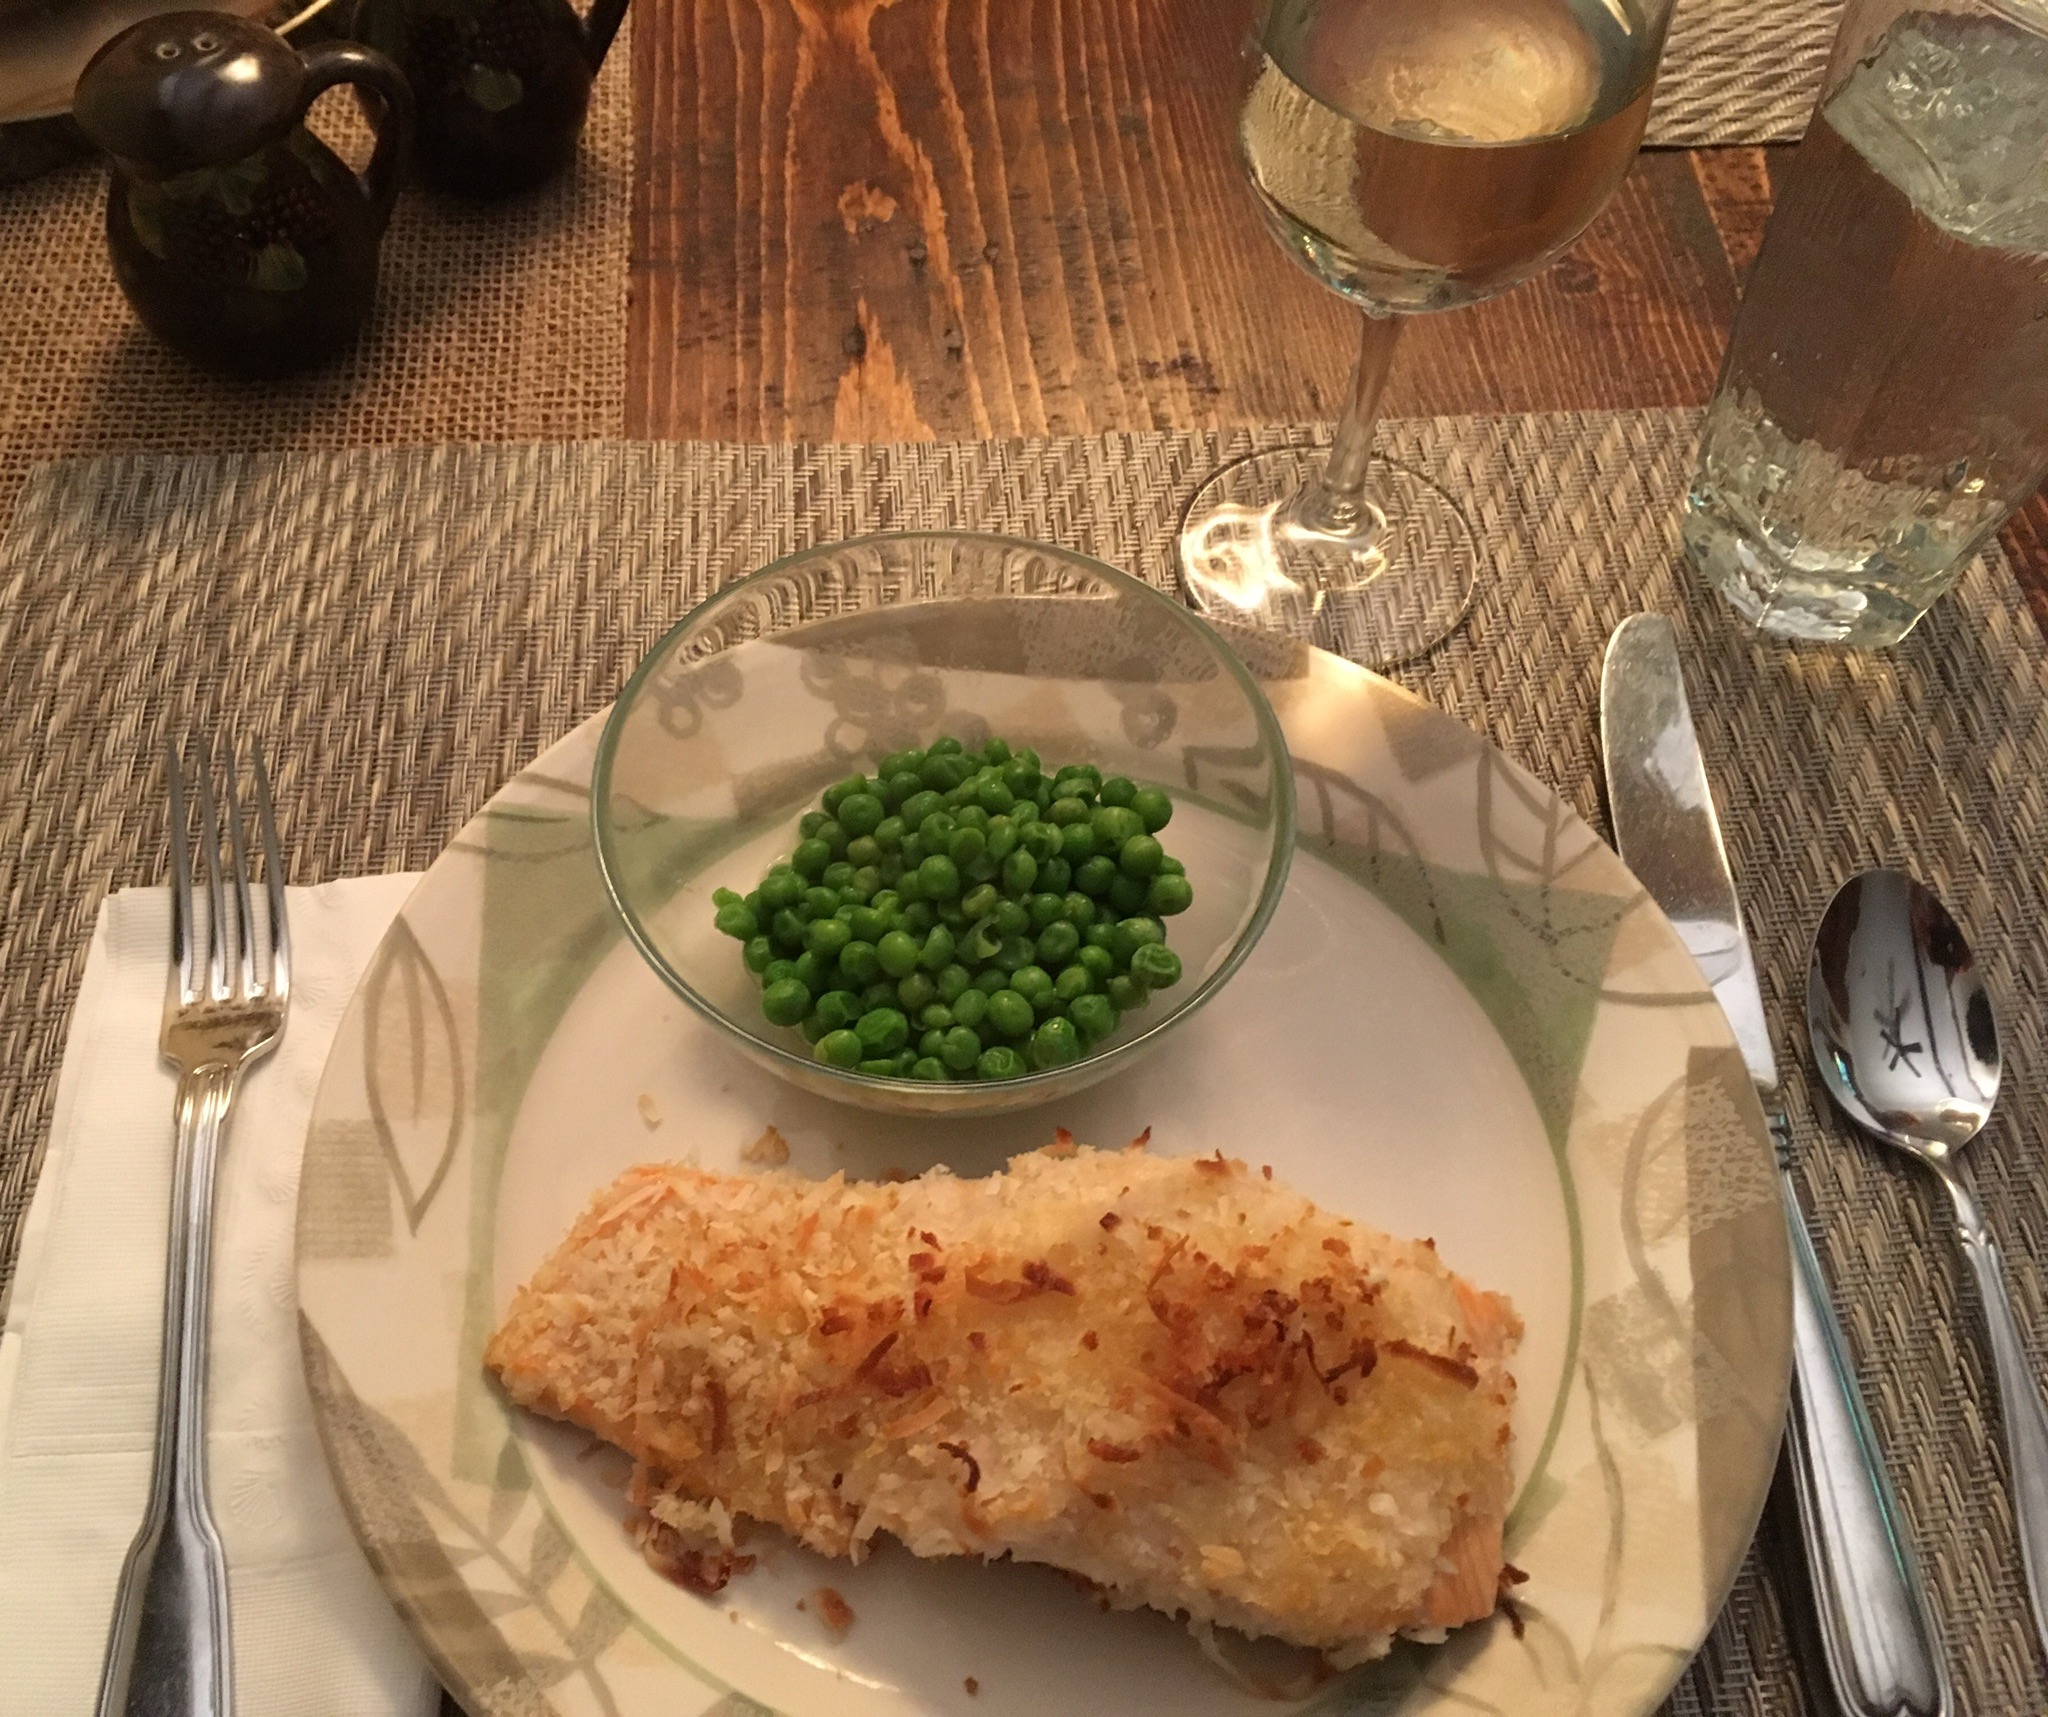 Baked Salmon with Coconut Crust 